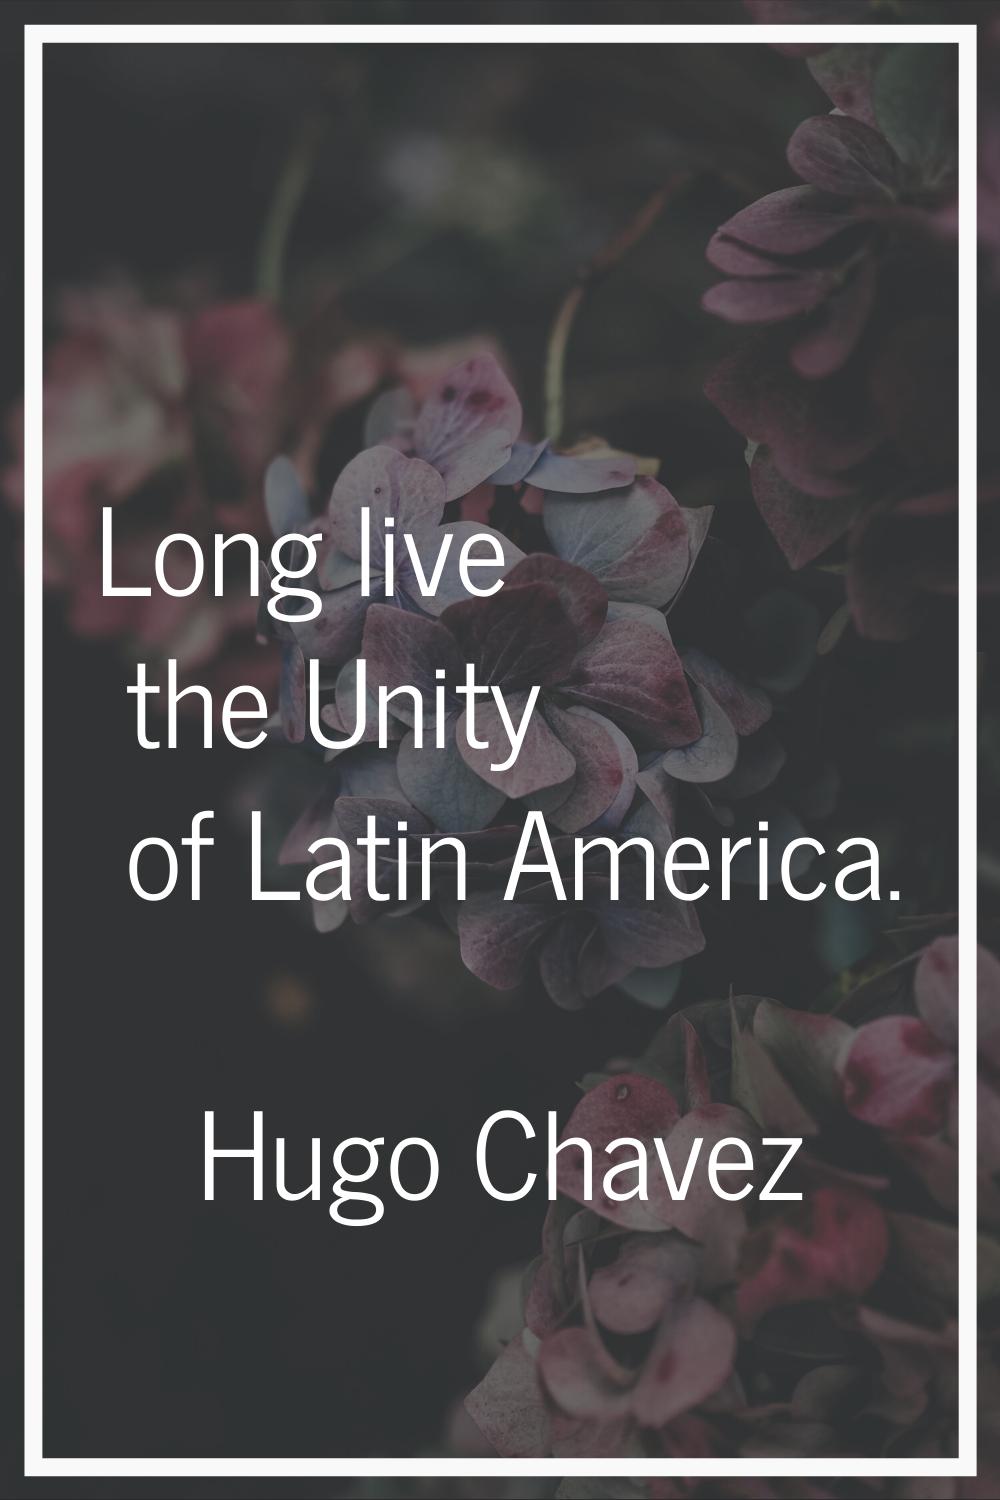 Long live the Unity of Latin America.